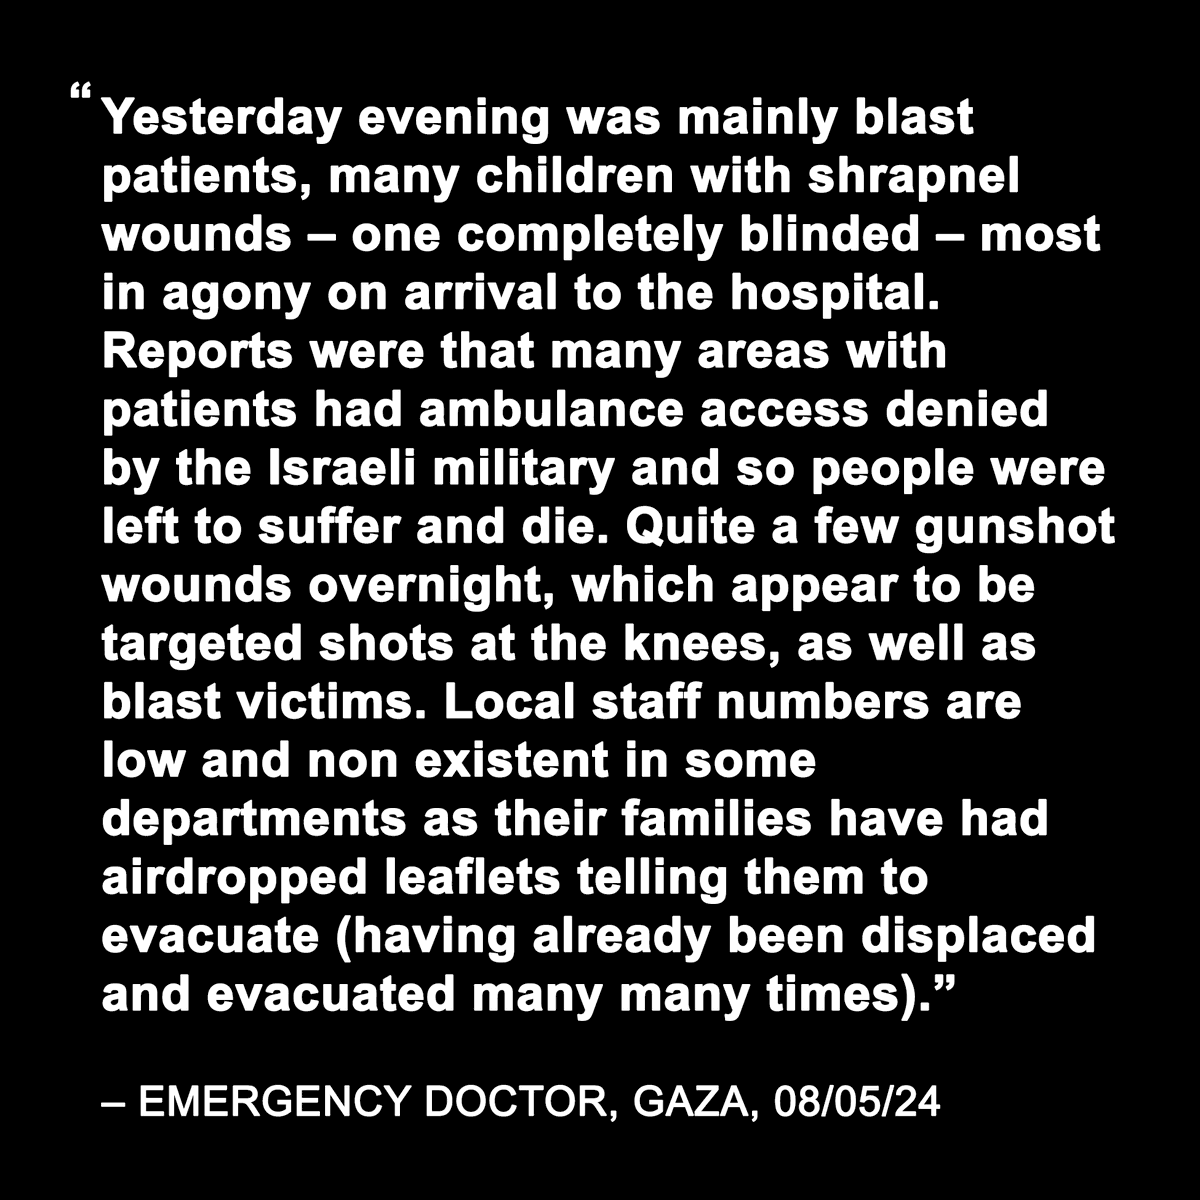 Doctors are sharing reports of Israeli forces blocking ambulances from rescuing casualties in Rafah & describe devastating, targeted injuries in those who reach medical aid. Hospital teams are exhausted, the influx of casualties is relentless & the patients are arriving in agony.